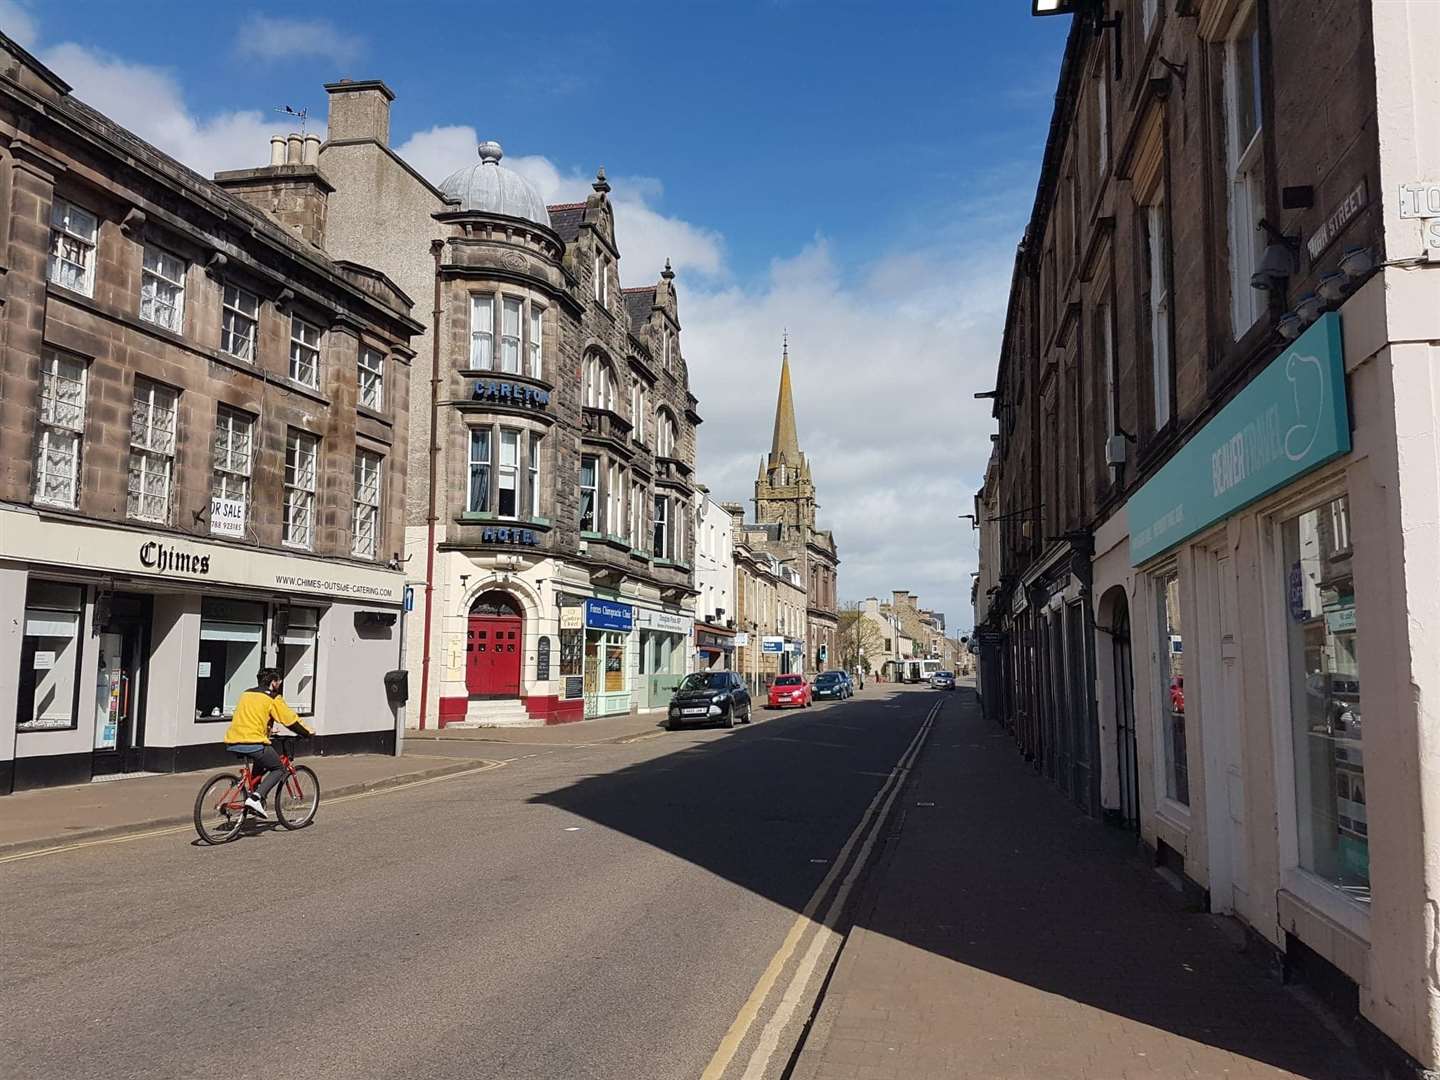 Forres could benefit from a functioning business association.